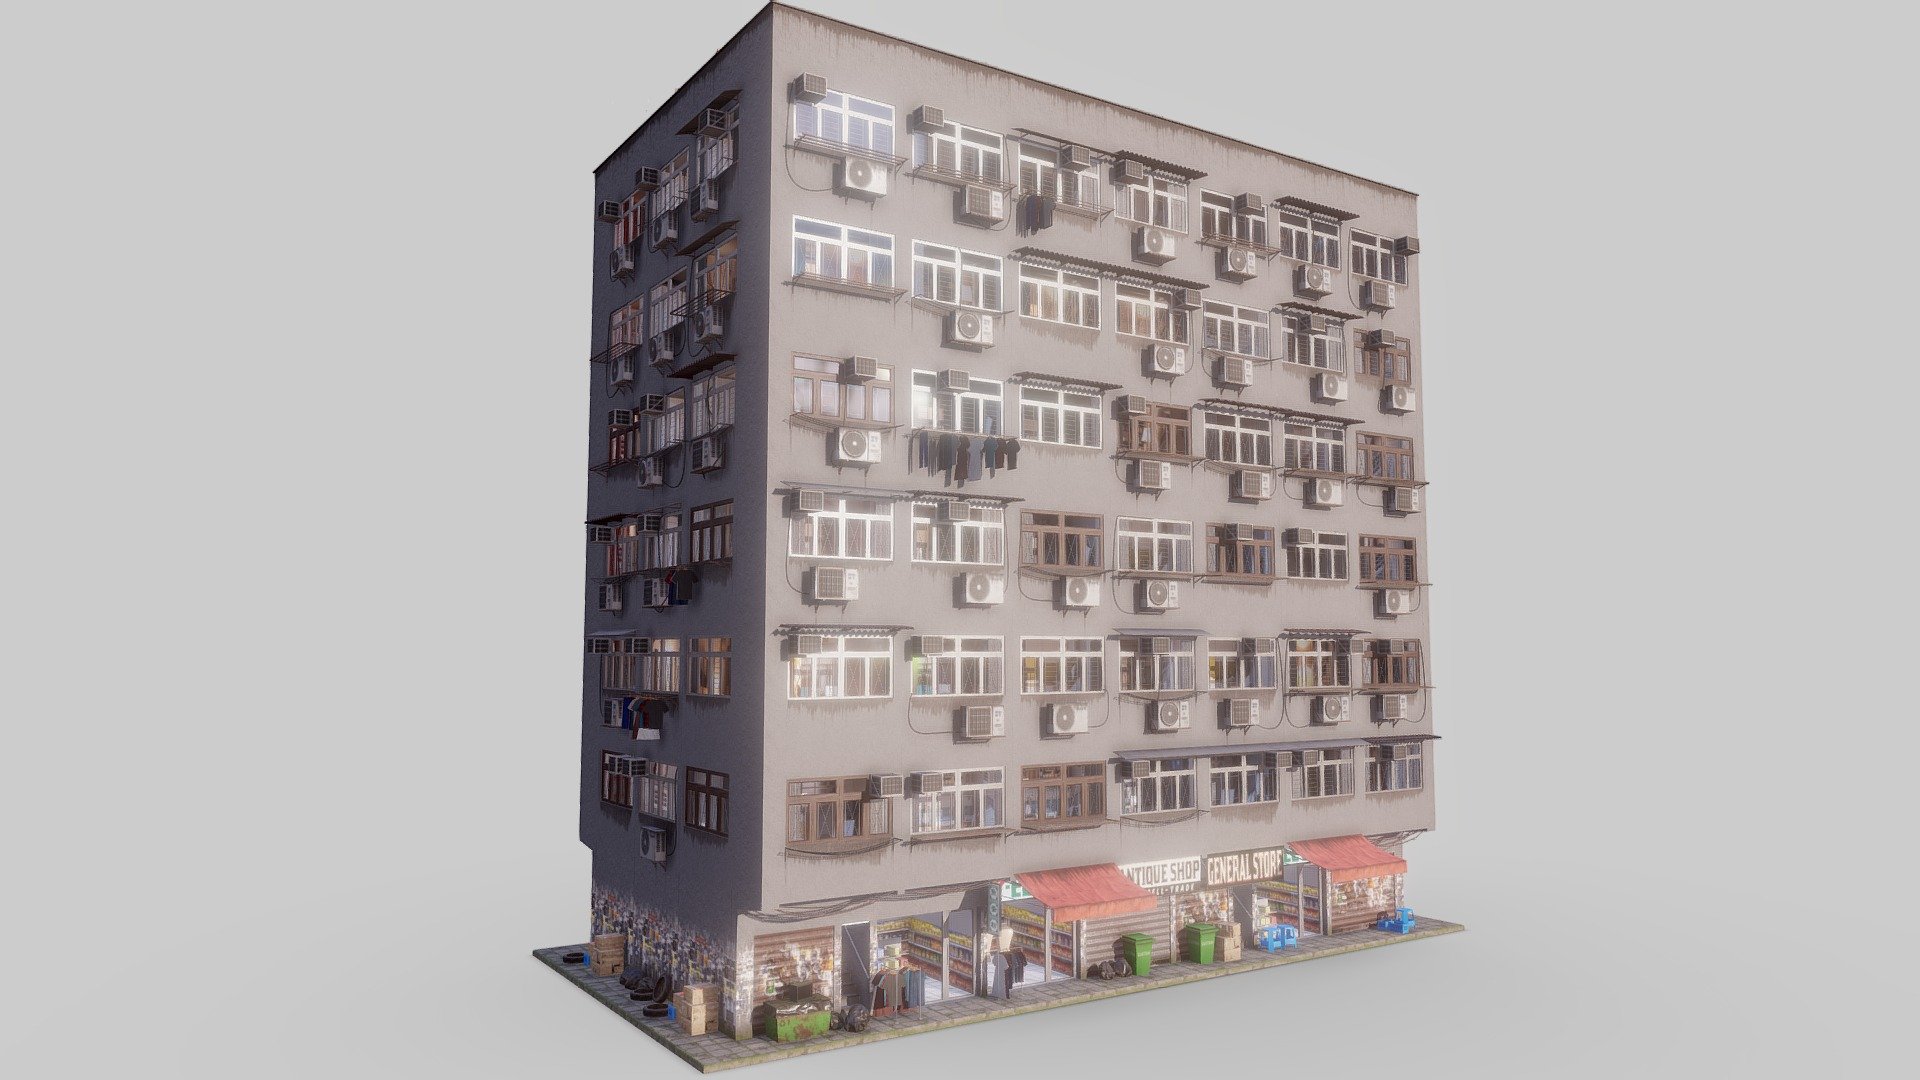 download the orignal format to use the geometry nodes of the build in blender 

This is a procedural building created with the help of geometry nodes of blender and can be used to create various type of build from only stores to a skyscraper. everything in this building is created by me and the geo nodes are also made by me. I did not use any person asset in the 
building 
https://www.artstation.com/artwork/KevkXy




the cars in this render are from https://sketchfab.com/comrade1280



I recently tried learning some geo nodes in blender so I hope you guys like it :) - Procedural Hong Kong building - Download Free 3D model by uday (@udayjeet) 3d model